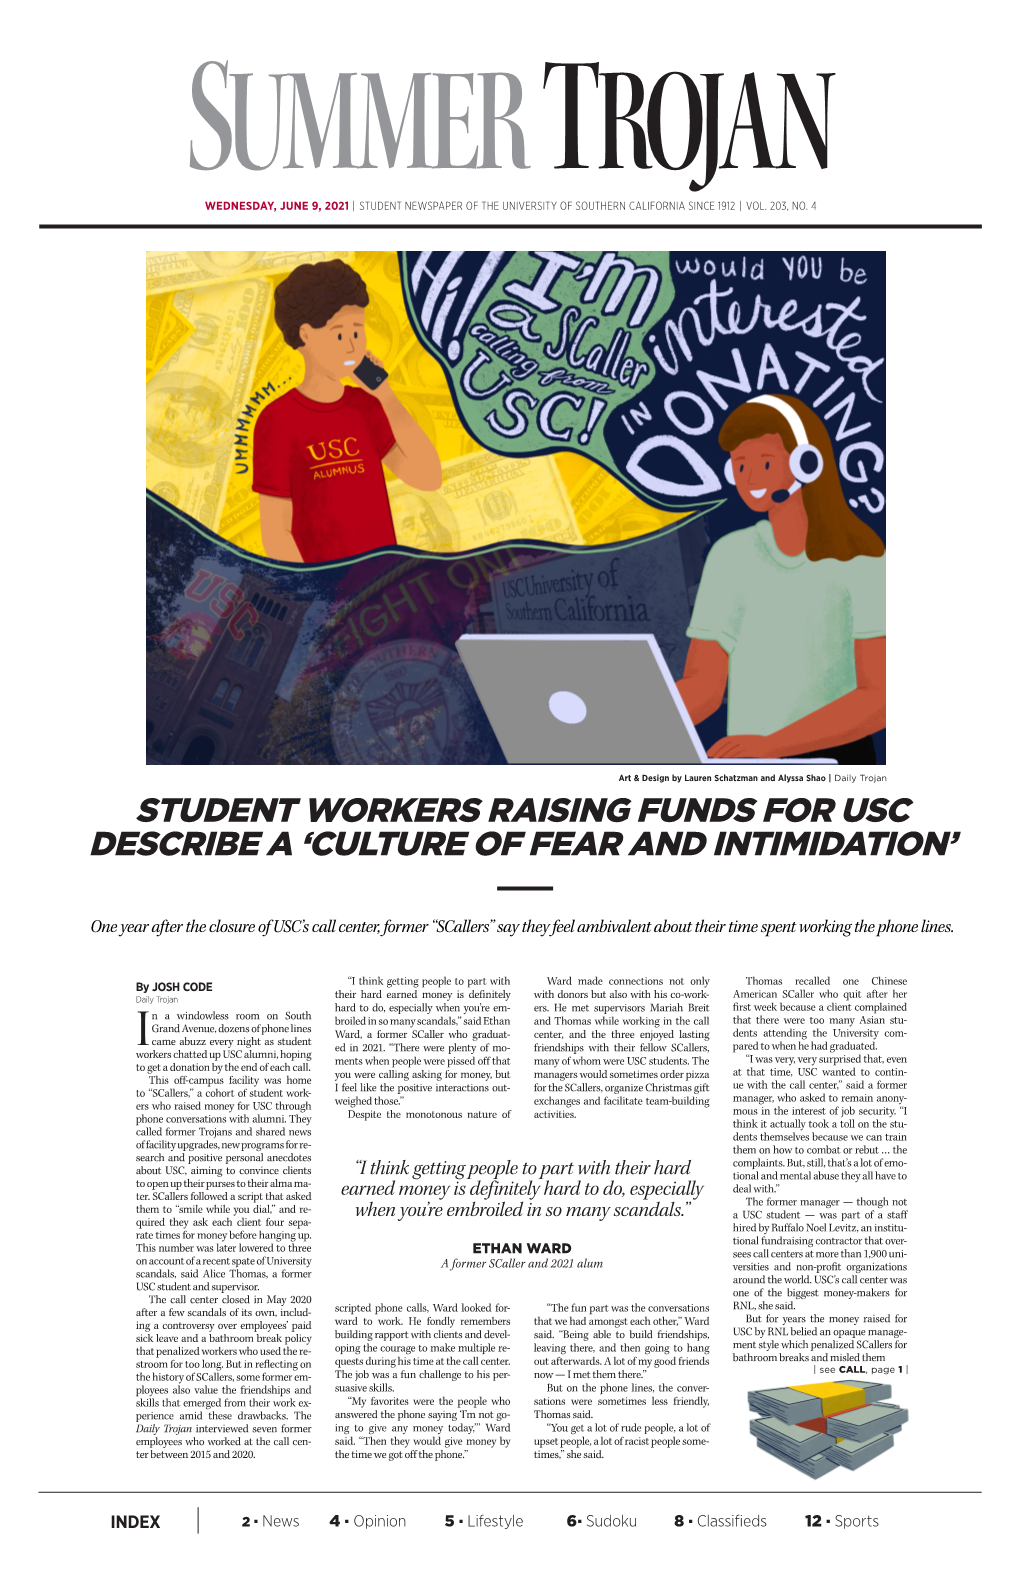 Student Workers Raising Funds for Usc Describe a 'Culture of Fear and Intimidation'